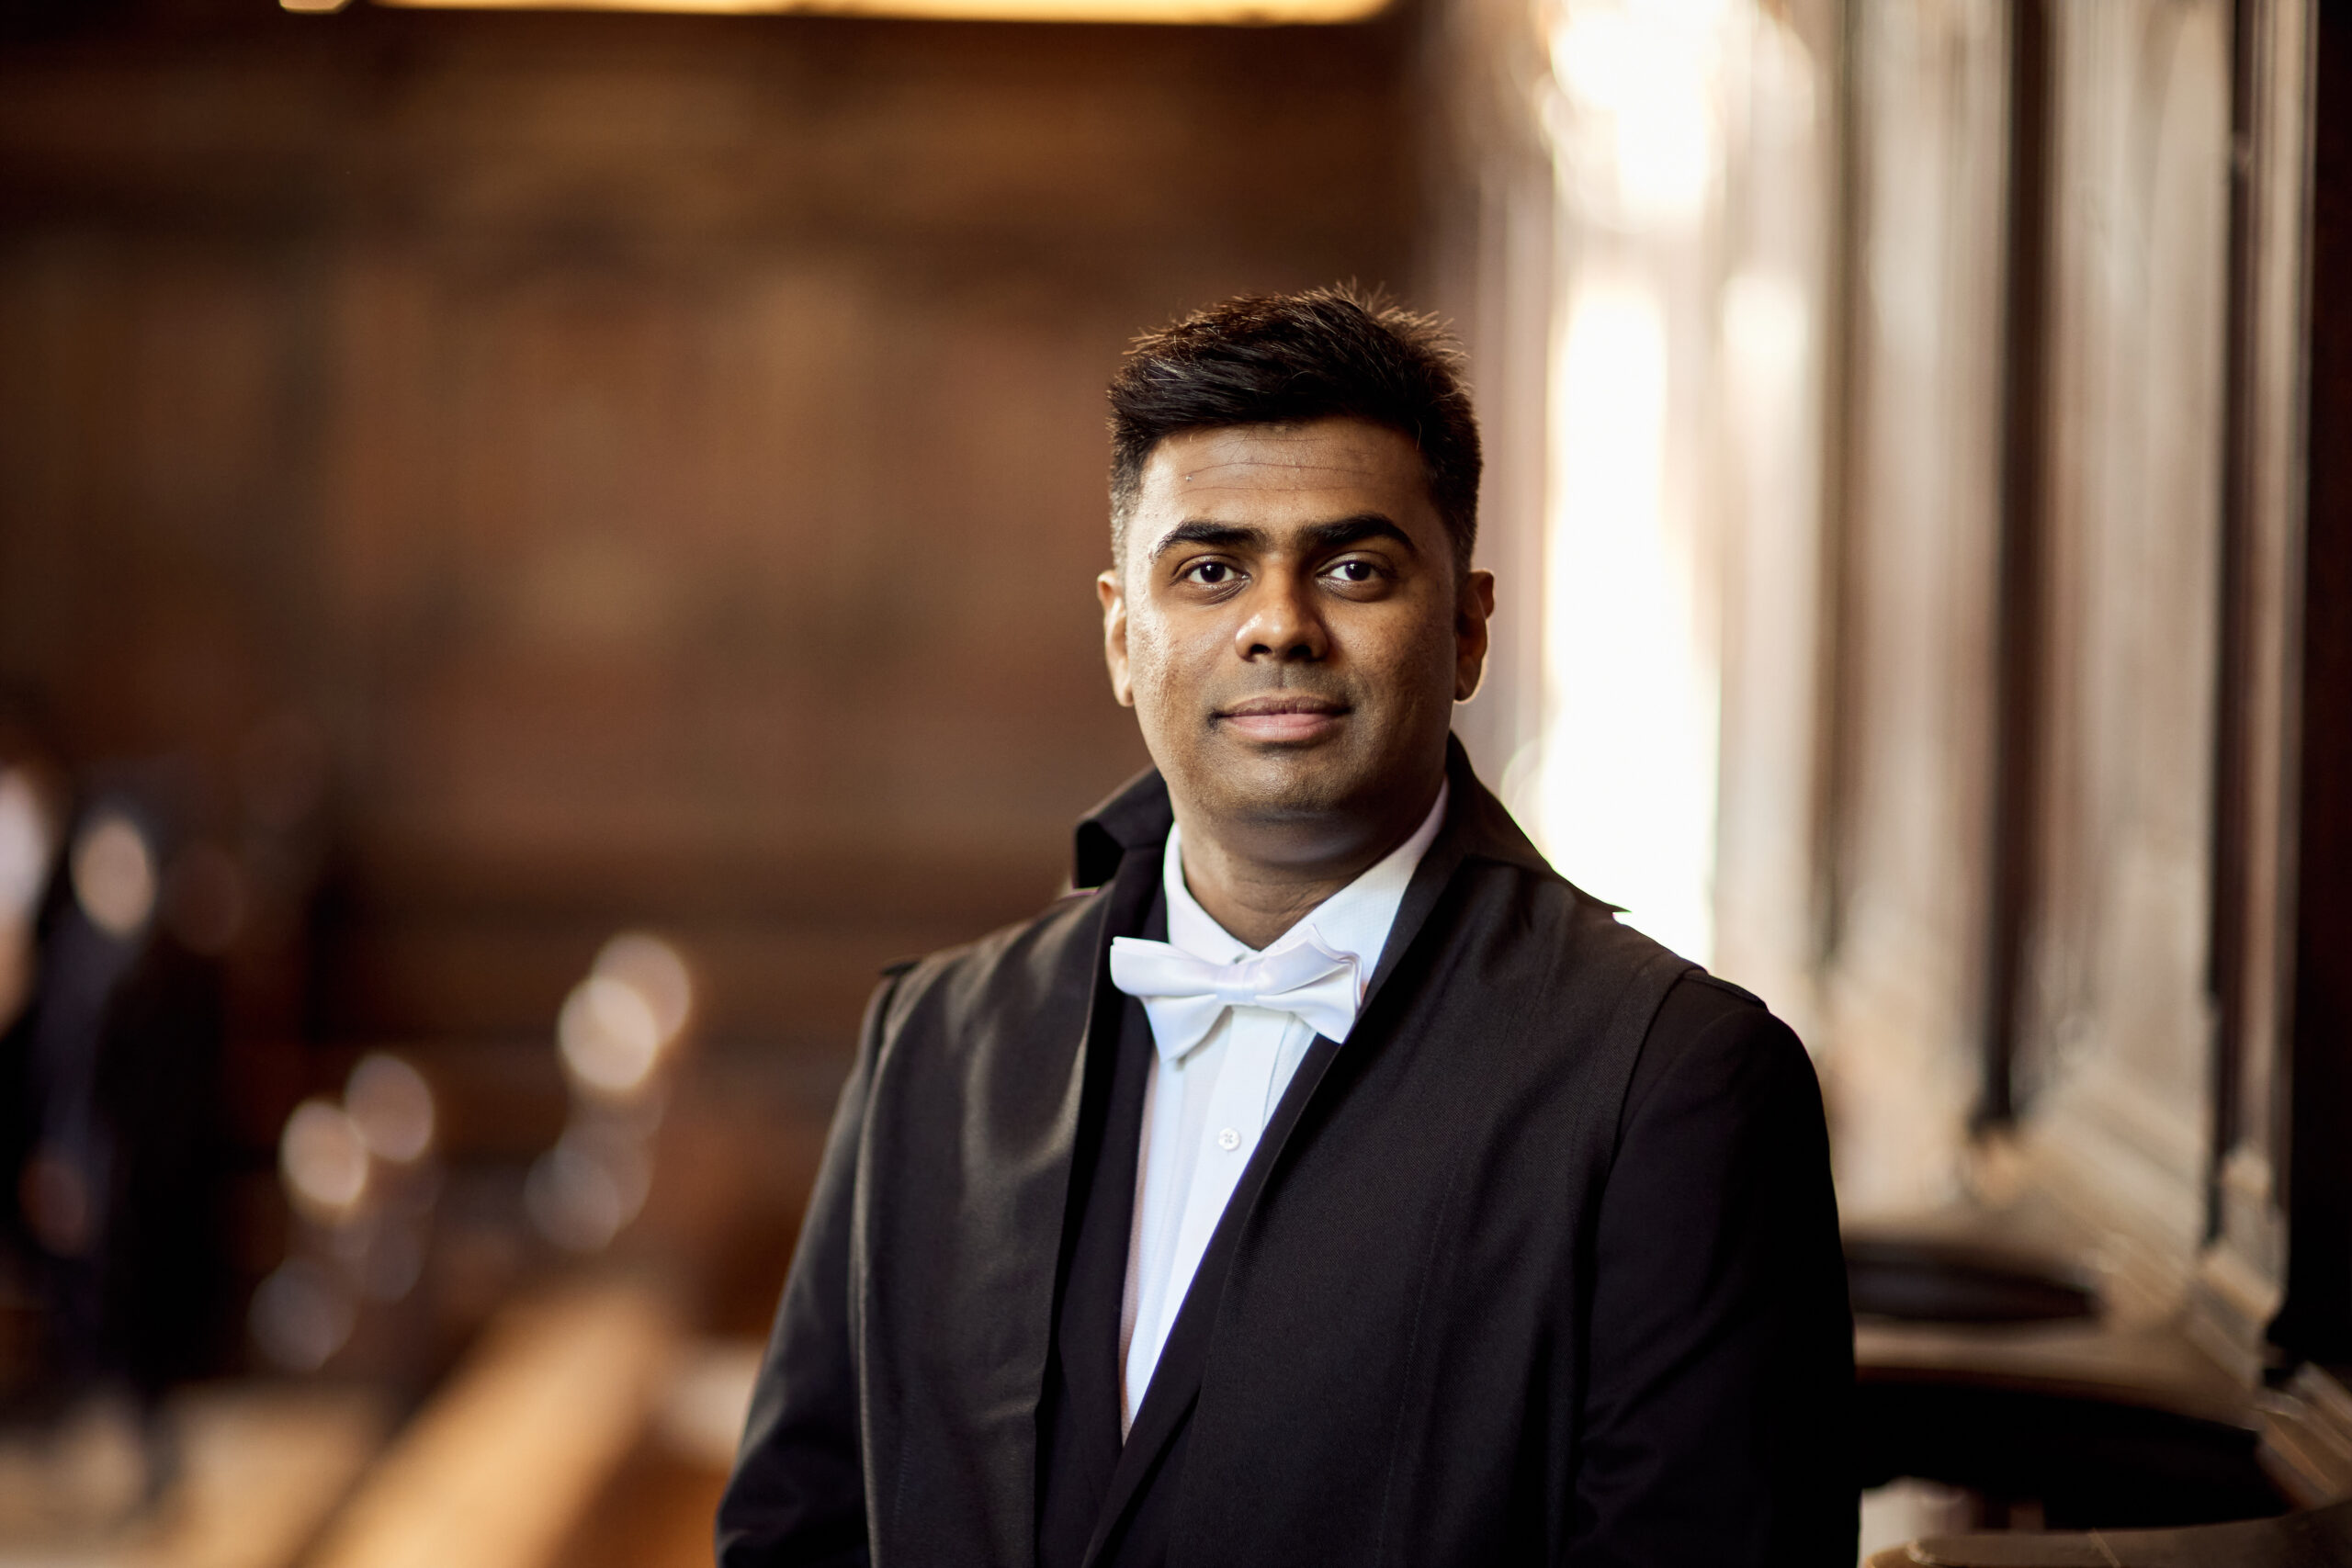 Kanishka Arumugam, Co-CEO of EKKI Water Technologies, has been appointed as an Honorary Fellow at the University of Warwick's Institute for Global Sustainable Development